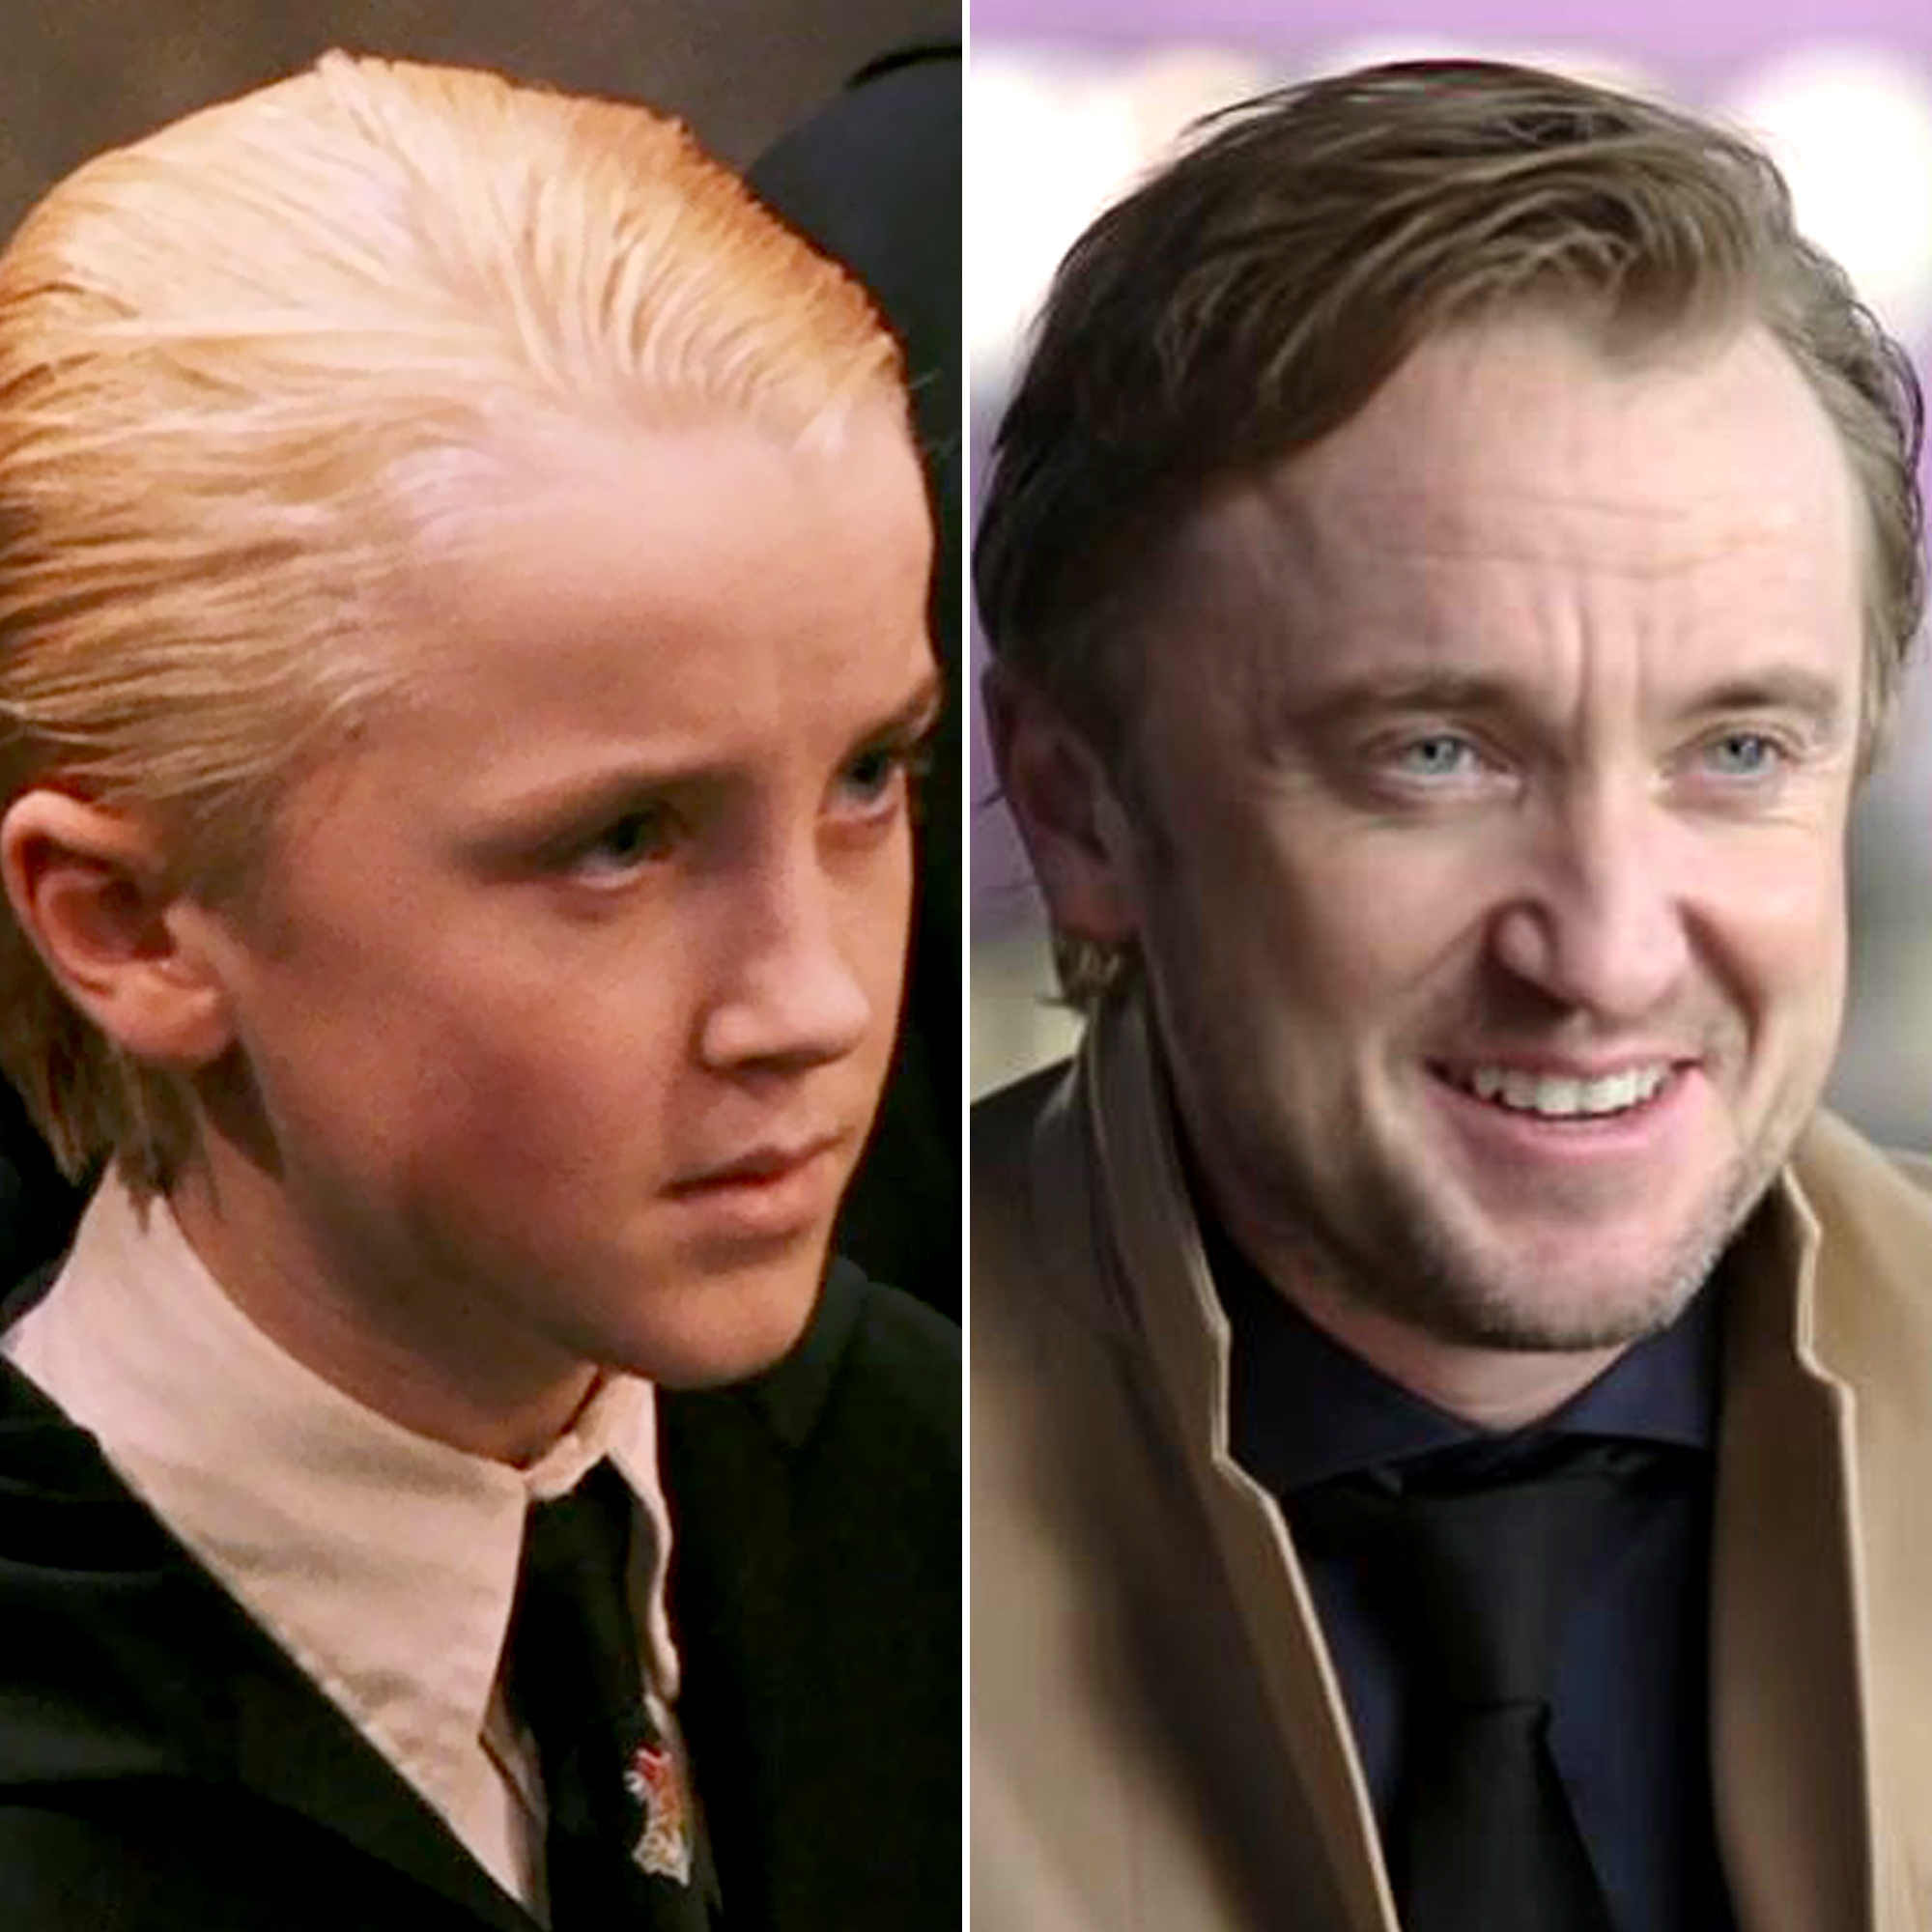 PHOTOS: 'Harry Potter' Stars: Where Are They Now? 21 Years